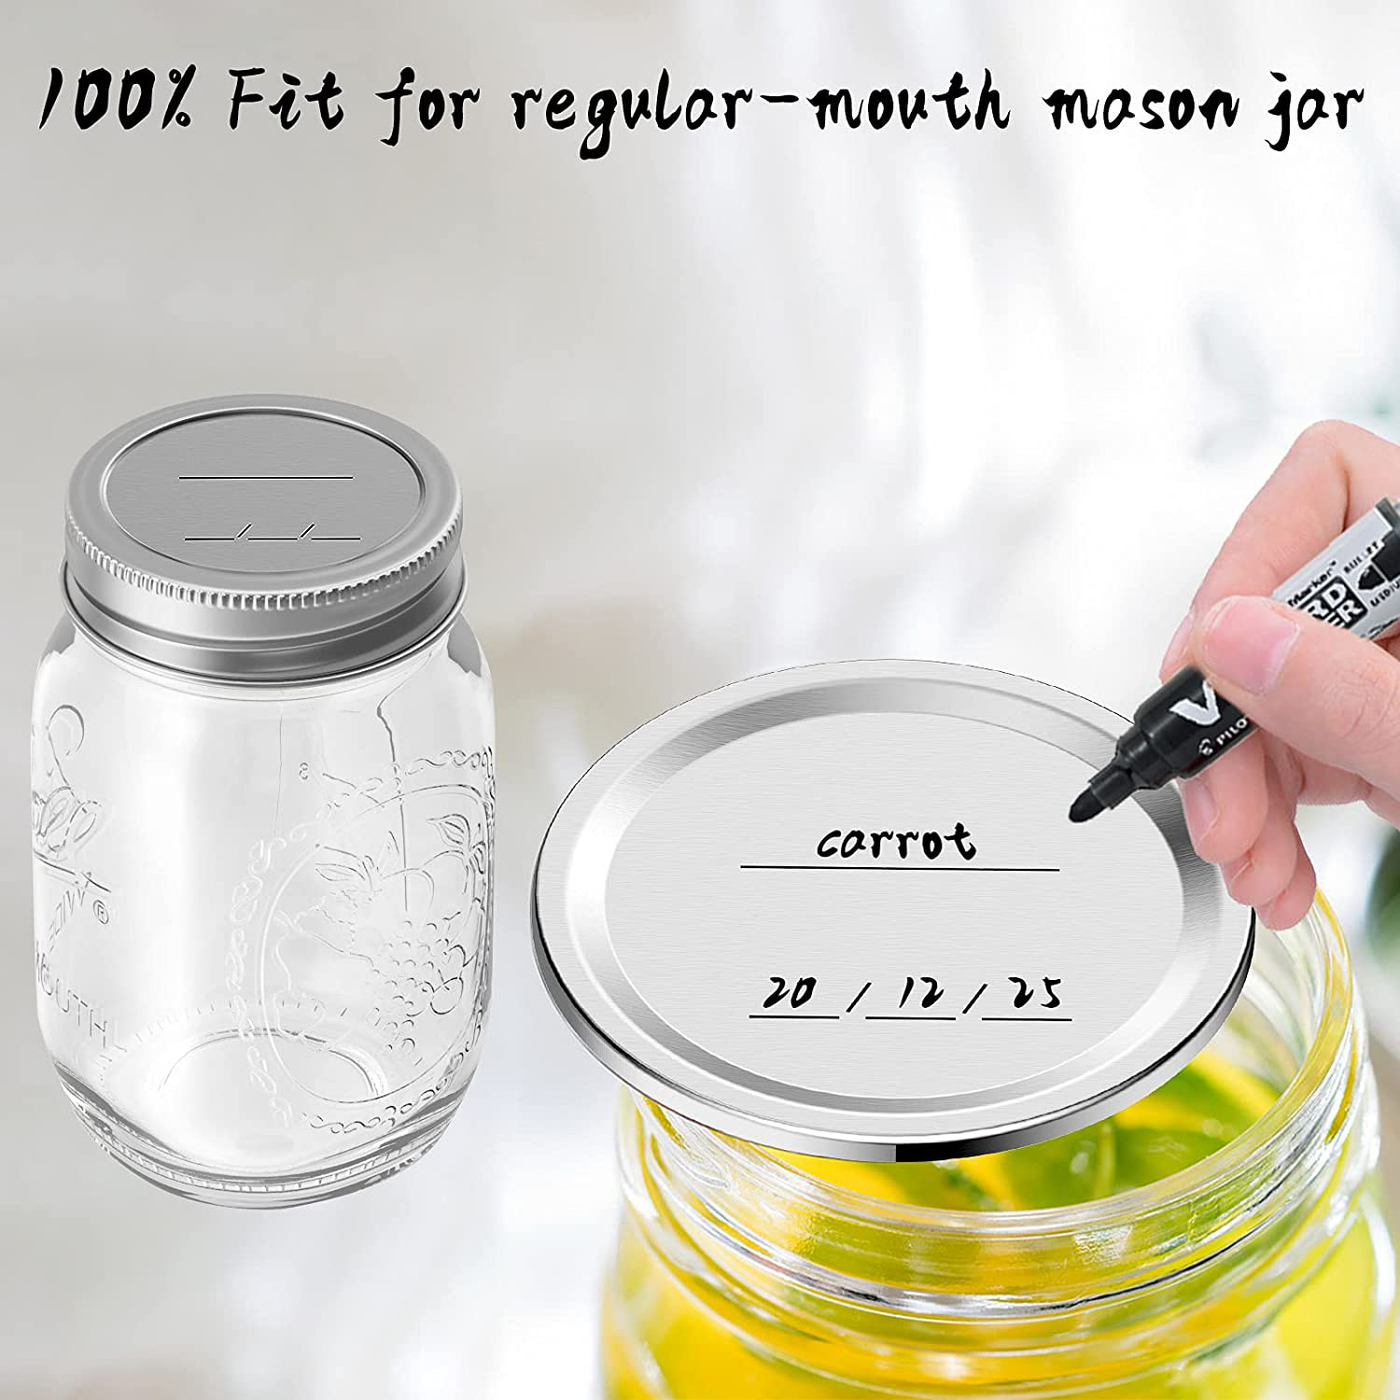 Wide Mouth Canning Lids, Enouvos 24-Count Canning Lids, Split-Type Lids for Mason Jar Wide Canning Lids Bulk,100% Fit and Airtight for Wide Mouth Jars (86mm Wide Mouth(24 Lids))